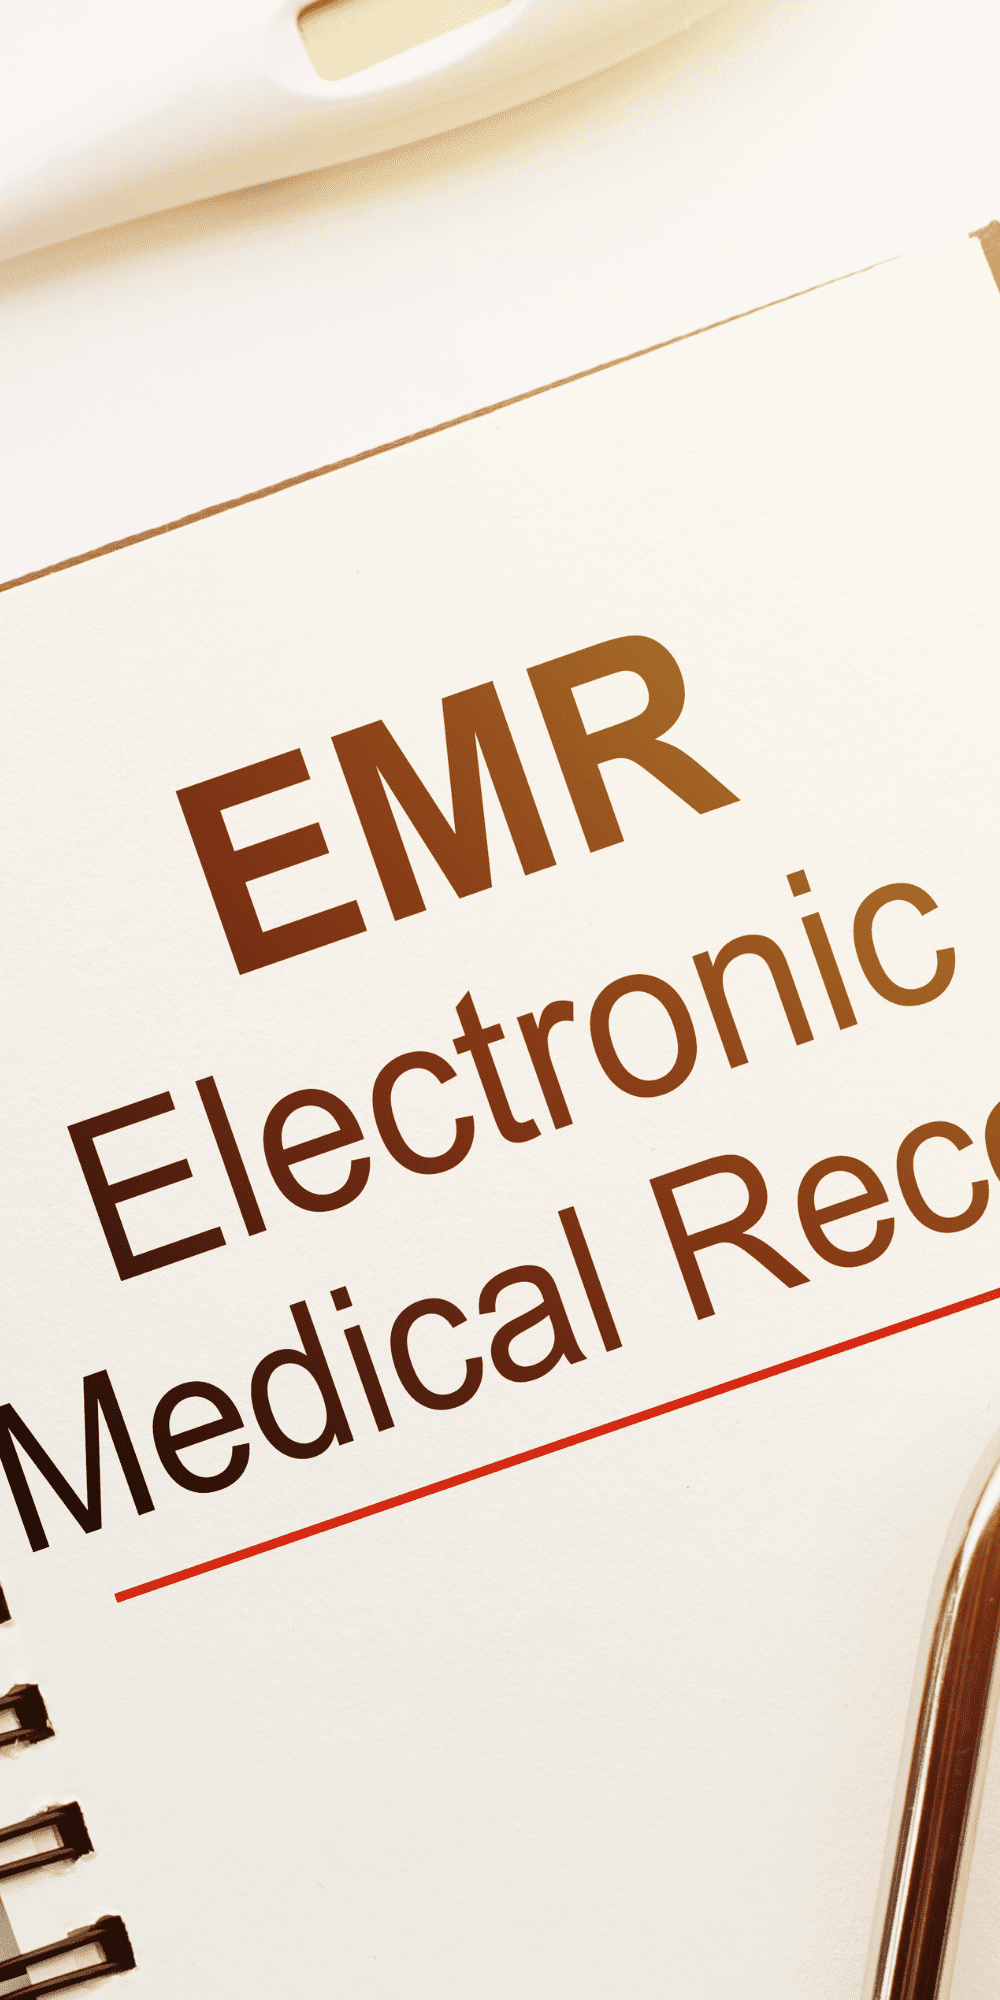 Electronic Medical Records Guide